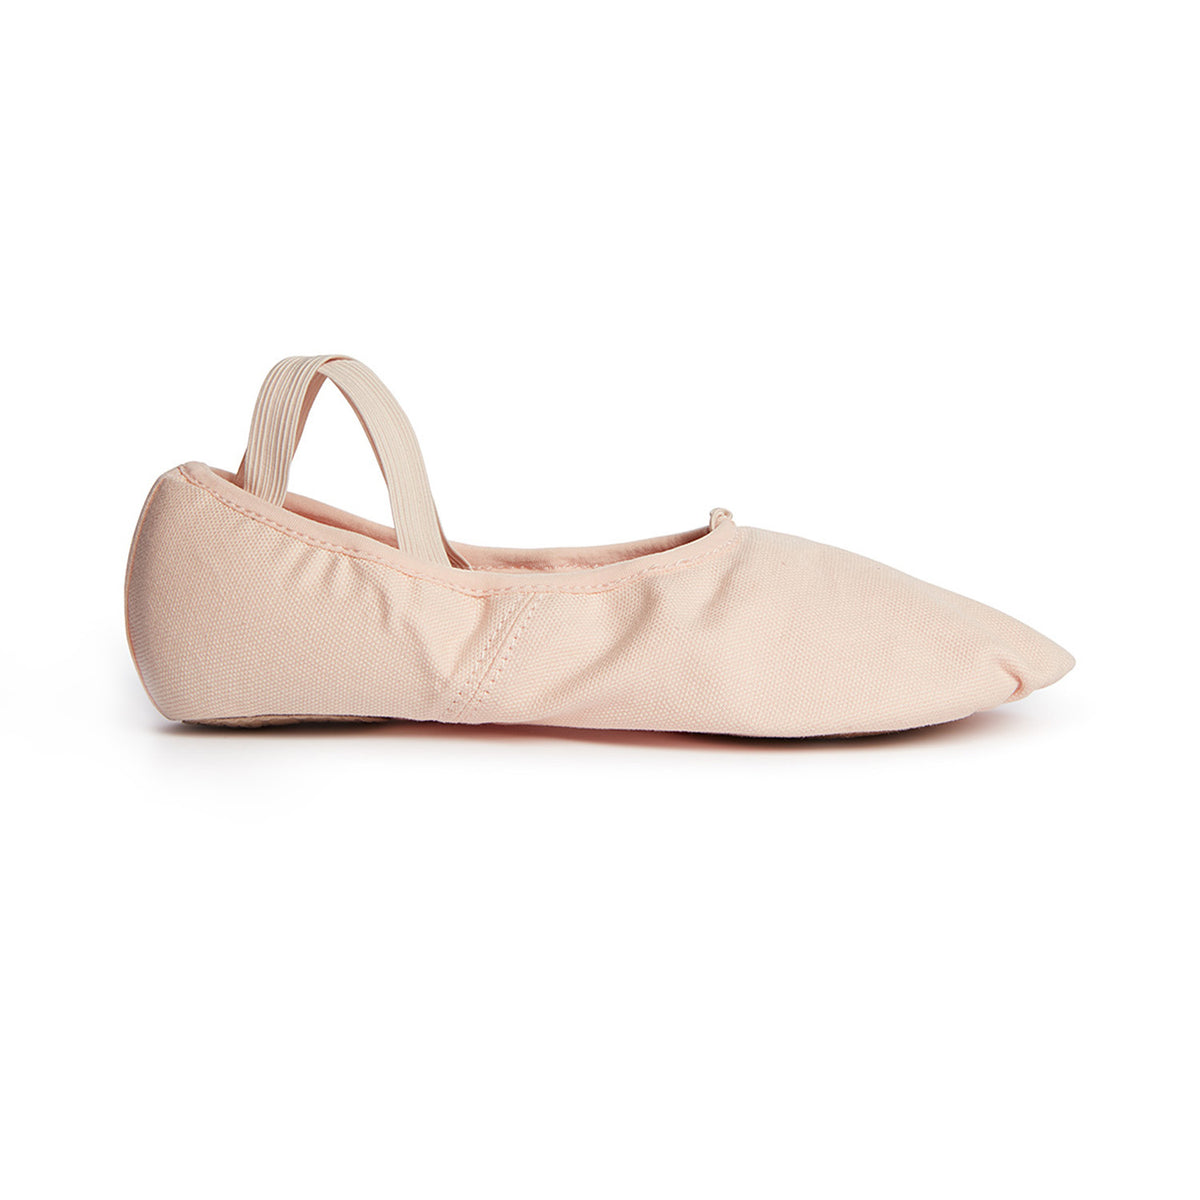 Orza Pro One Ballet Shoe Women's Pink Canvas – Orza Brand